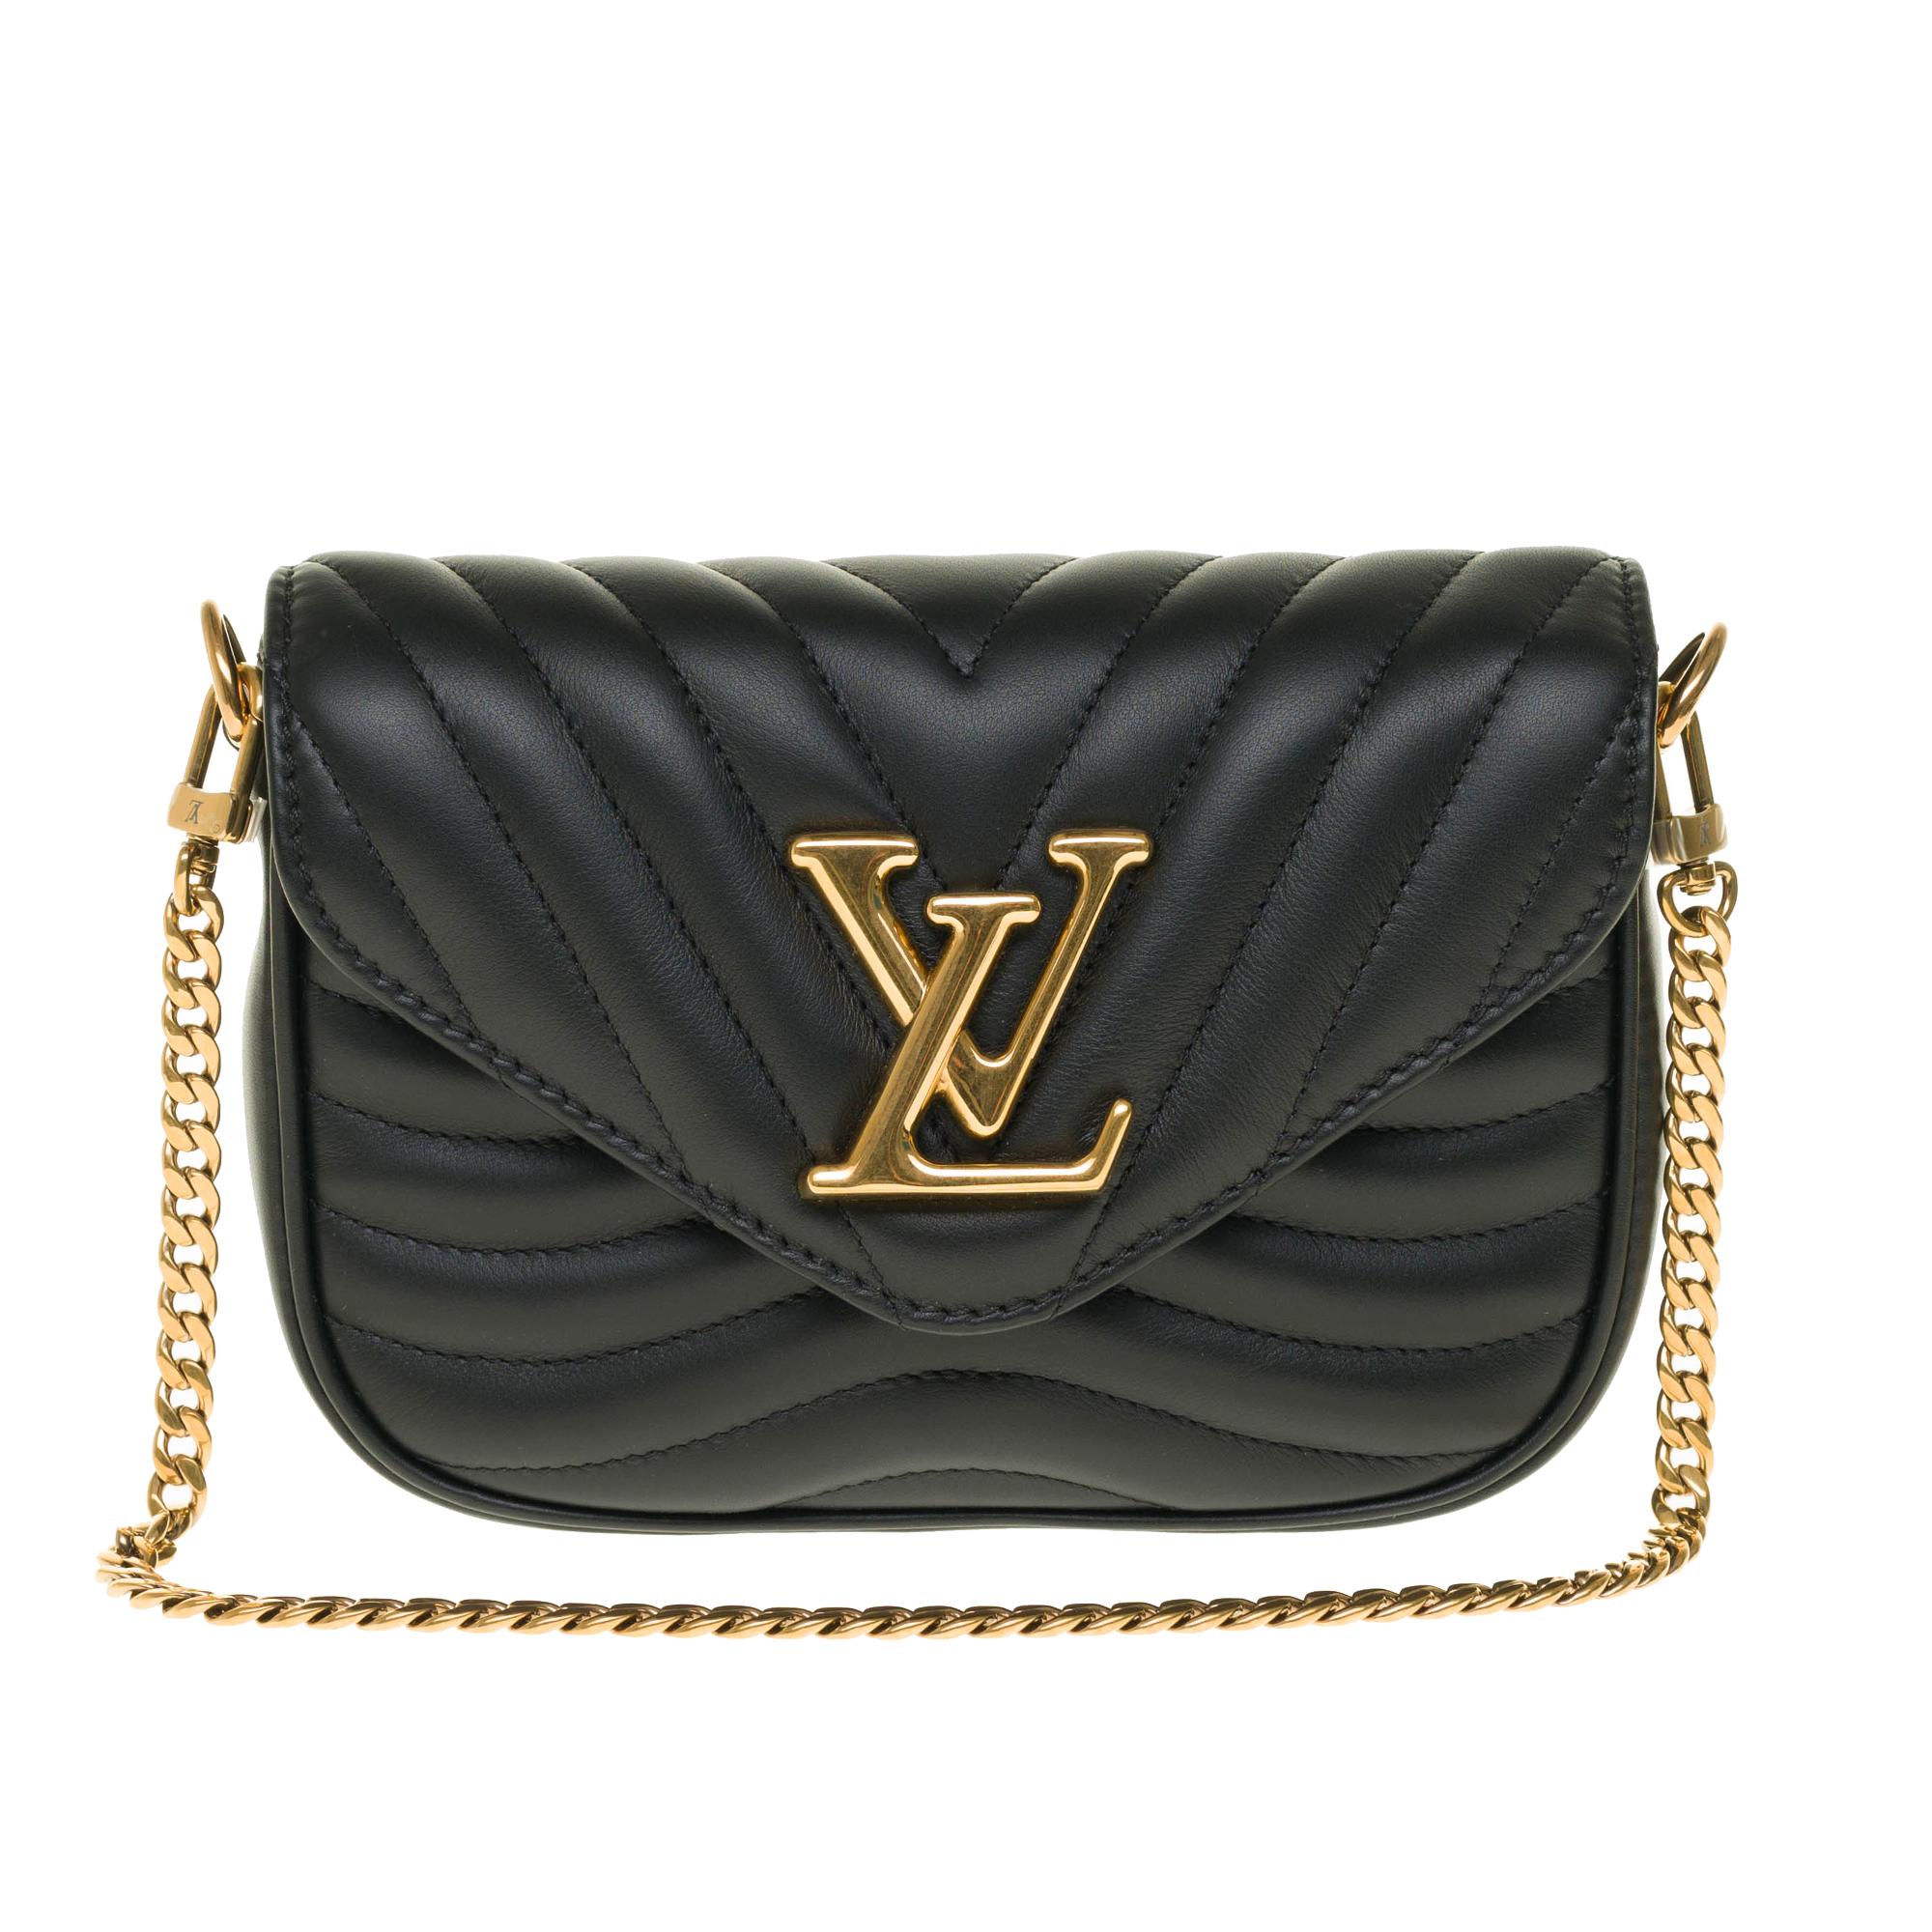 SOLD OUT- Limited Edition - Unavailable

This Louis Vuitton New Wave multi-pouch is made of quilted calf leather. This contemporary bag is topped with a golden chain that offers a hand or shoulder carry. Its wide bag strap is embroidered with the